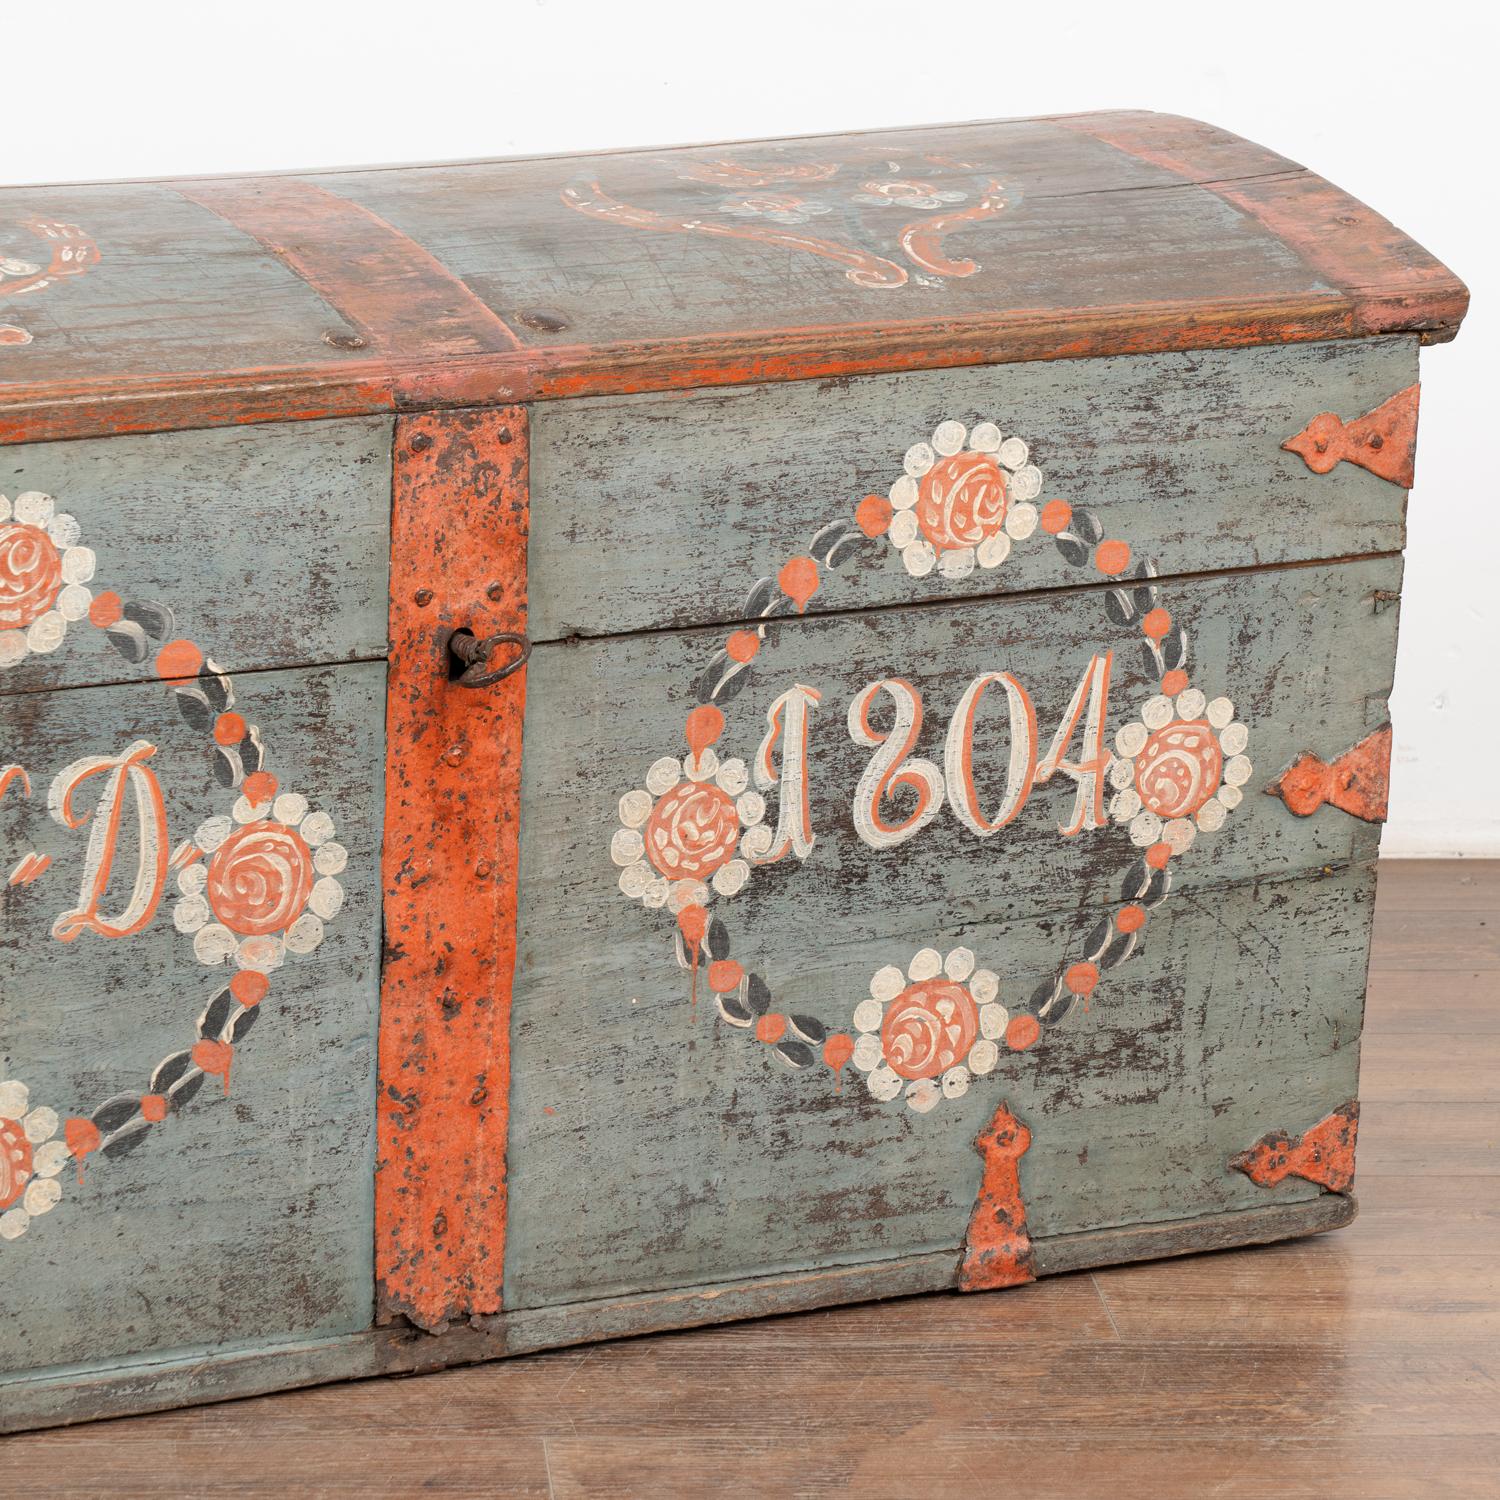 Original Blue Painted Dome Top Trunk from Sweden dated 1804 For Sale 1